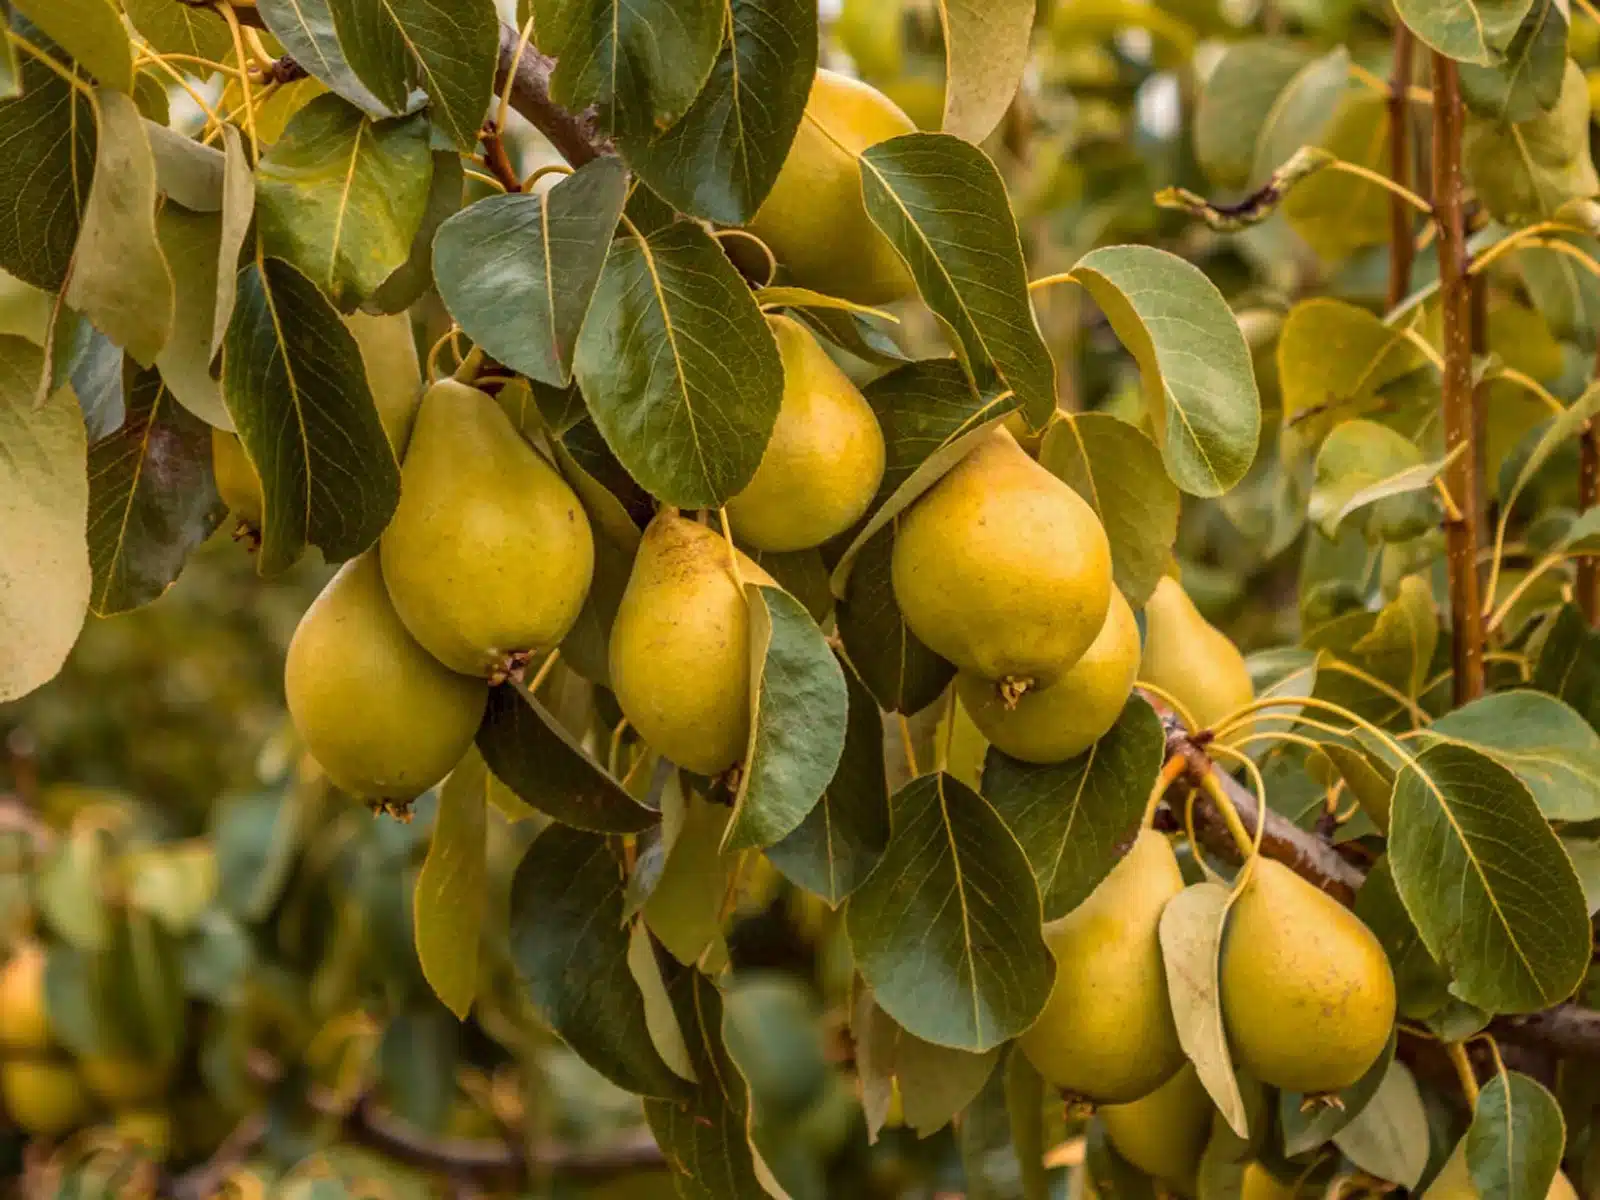 Pears at Green Bluff